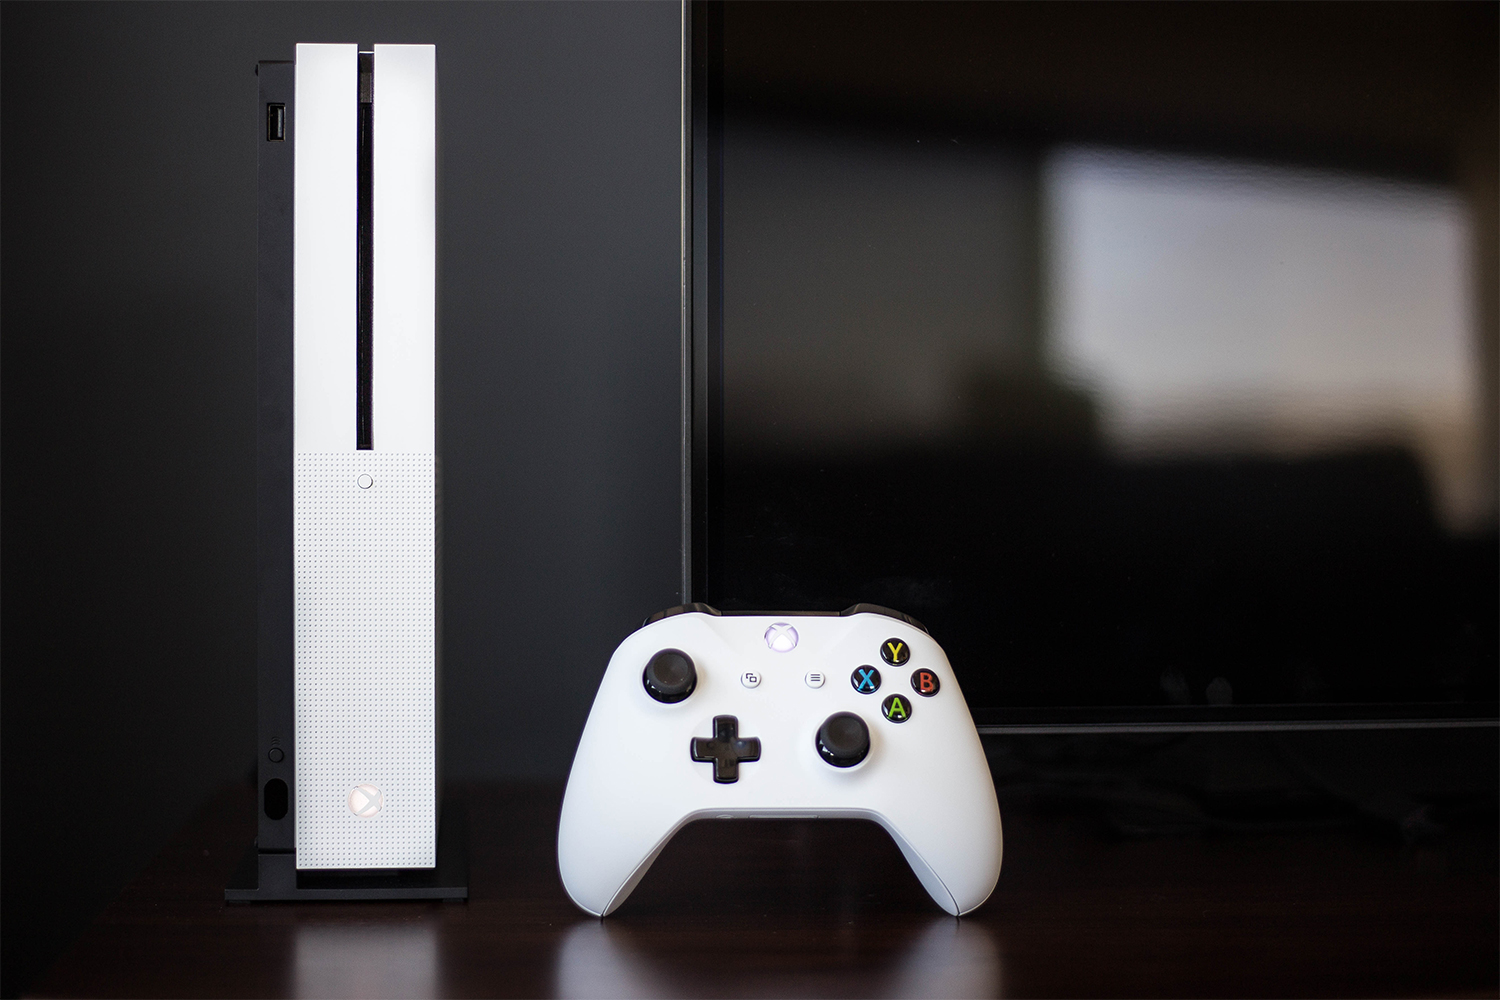 Xbox One S review: Great console and 4K Blu-ray player